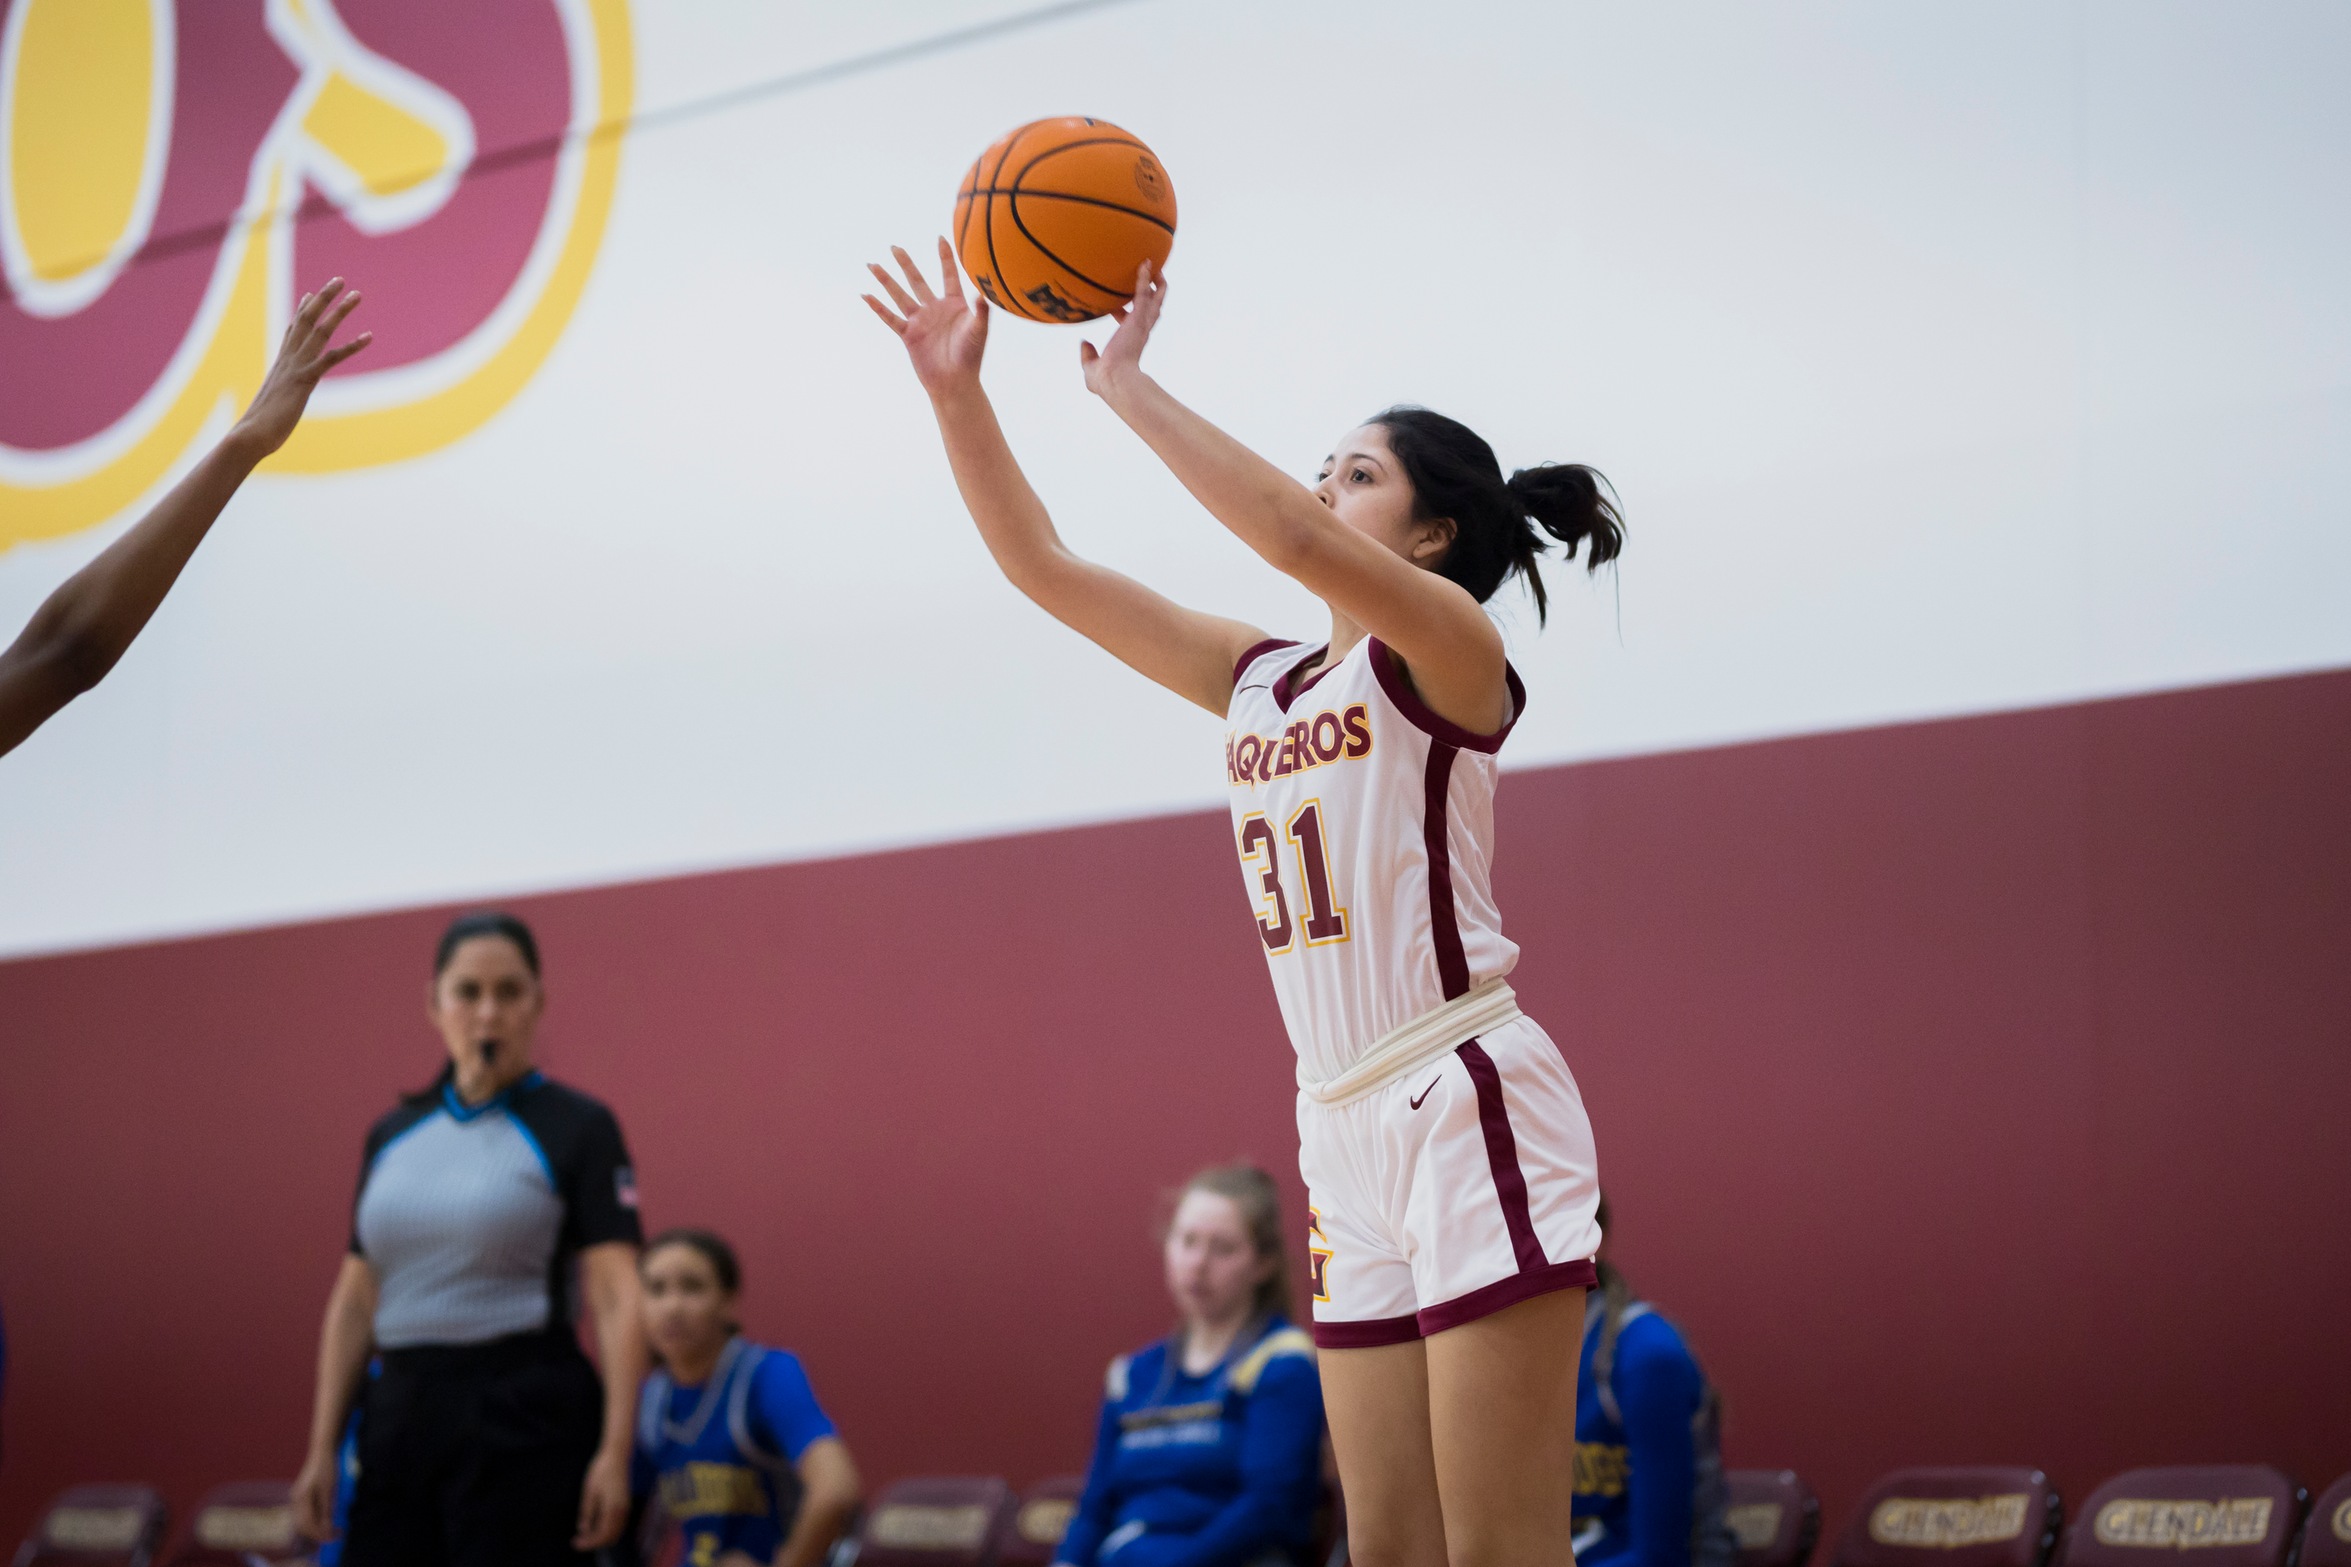 GCC Women's Basketball starts fast and gets the best of Bakersfield College 79-34 Feb. 8